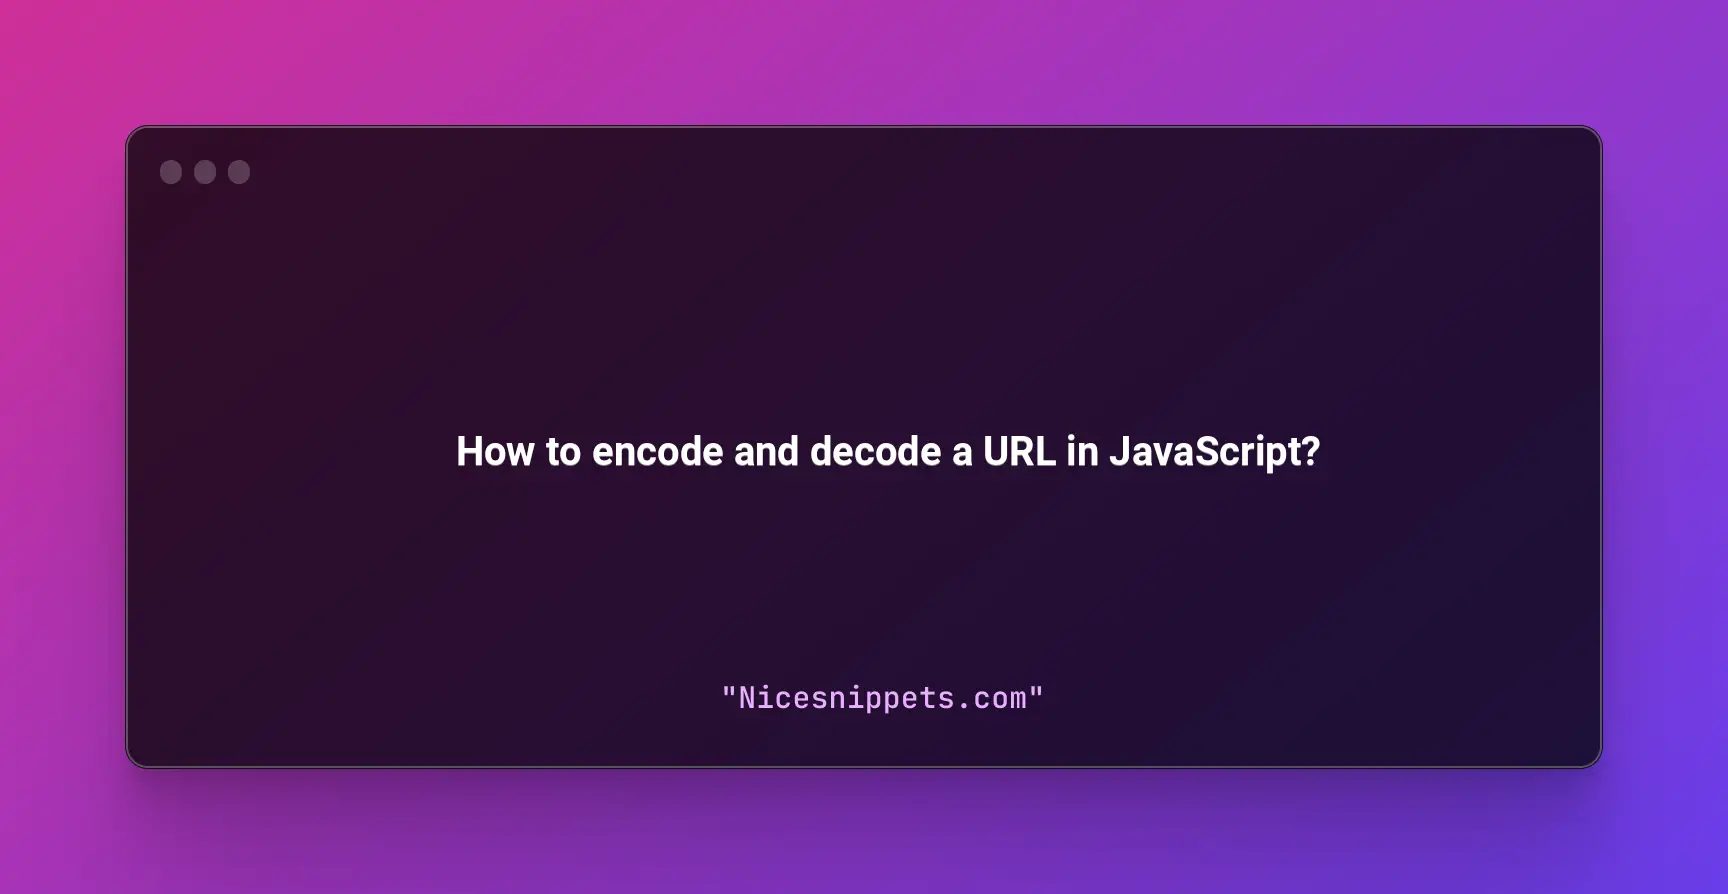 How to encode and decode a URL in JavaScript?